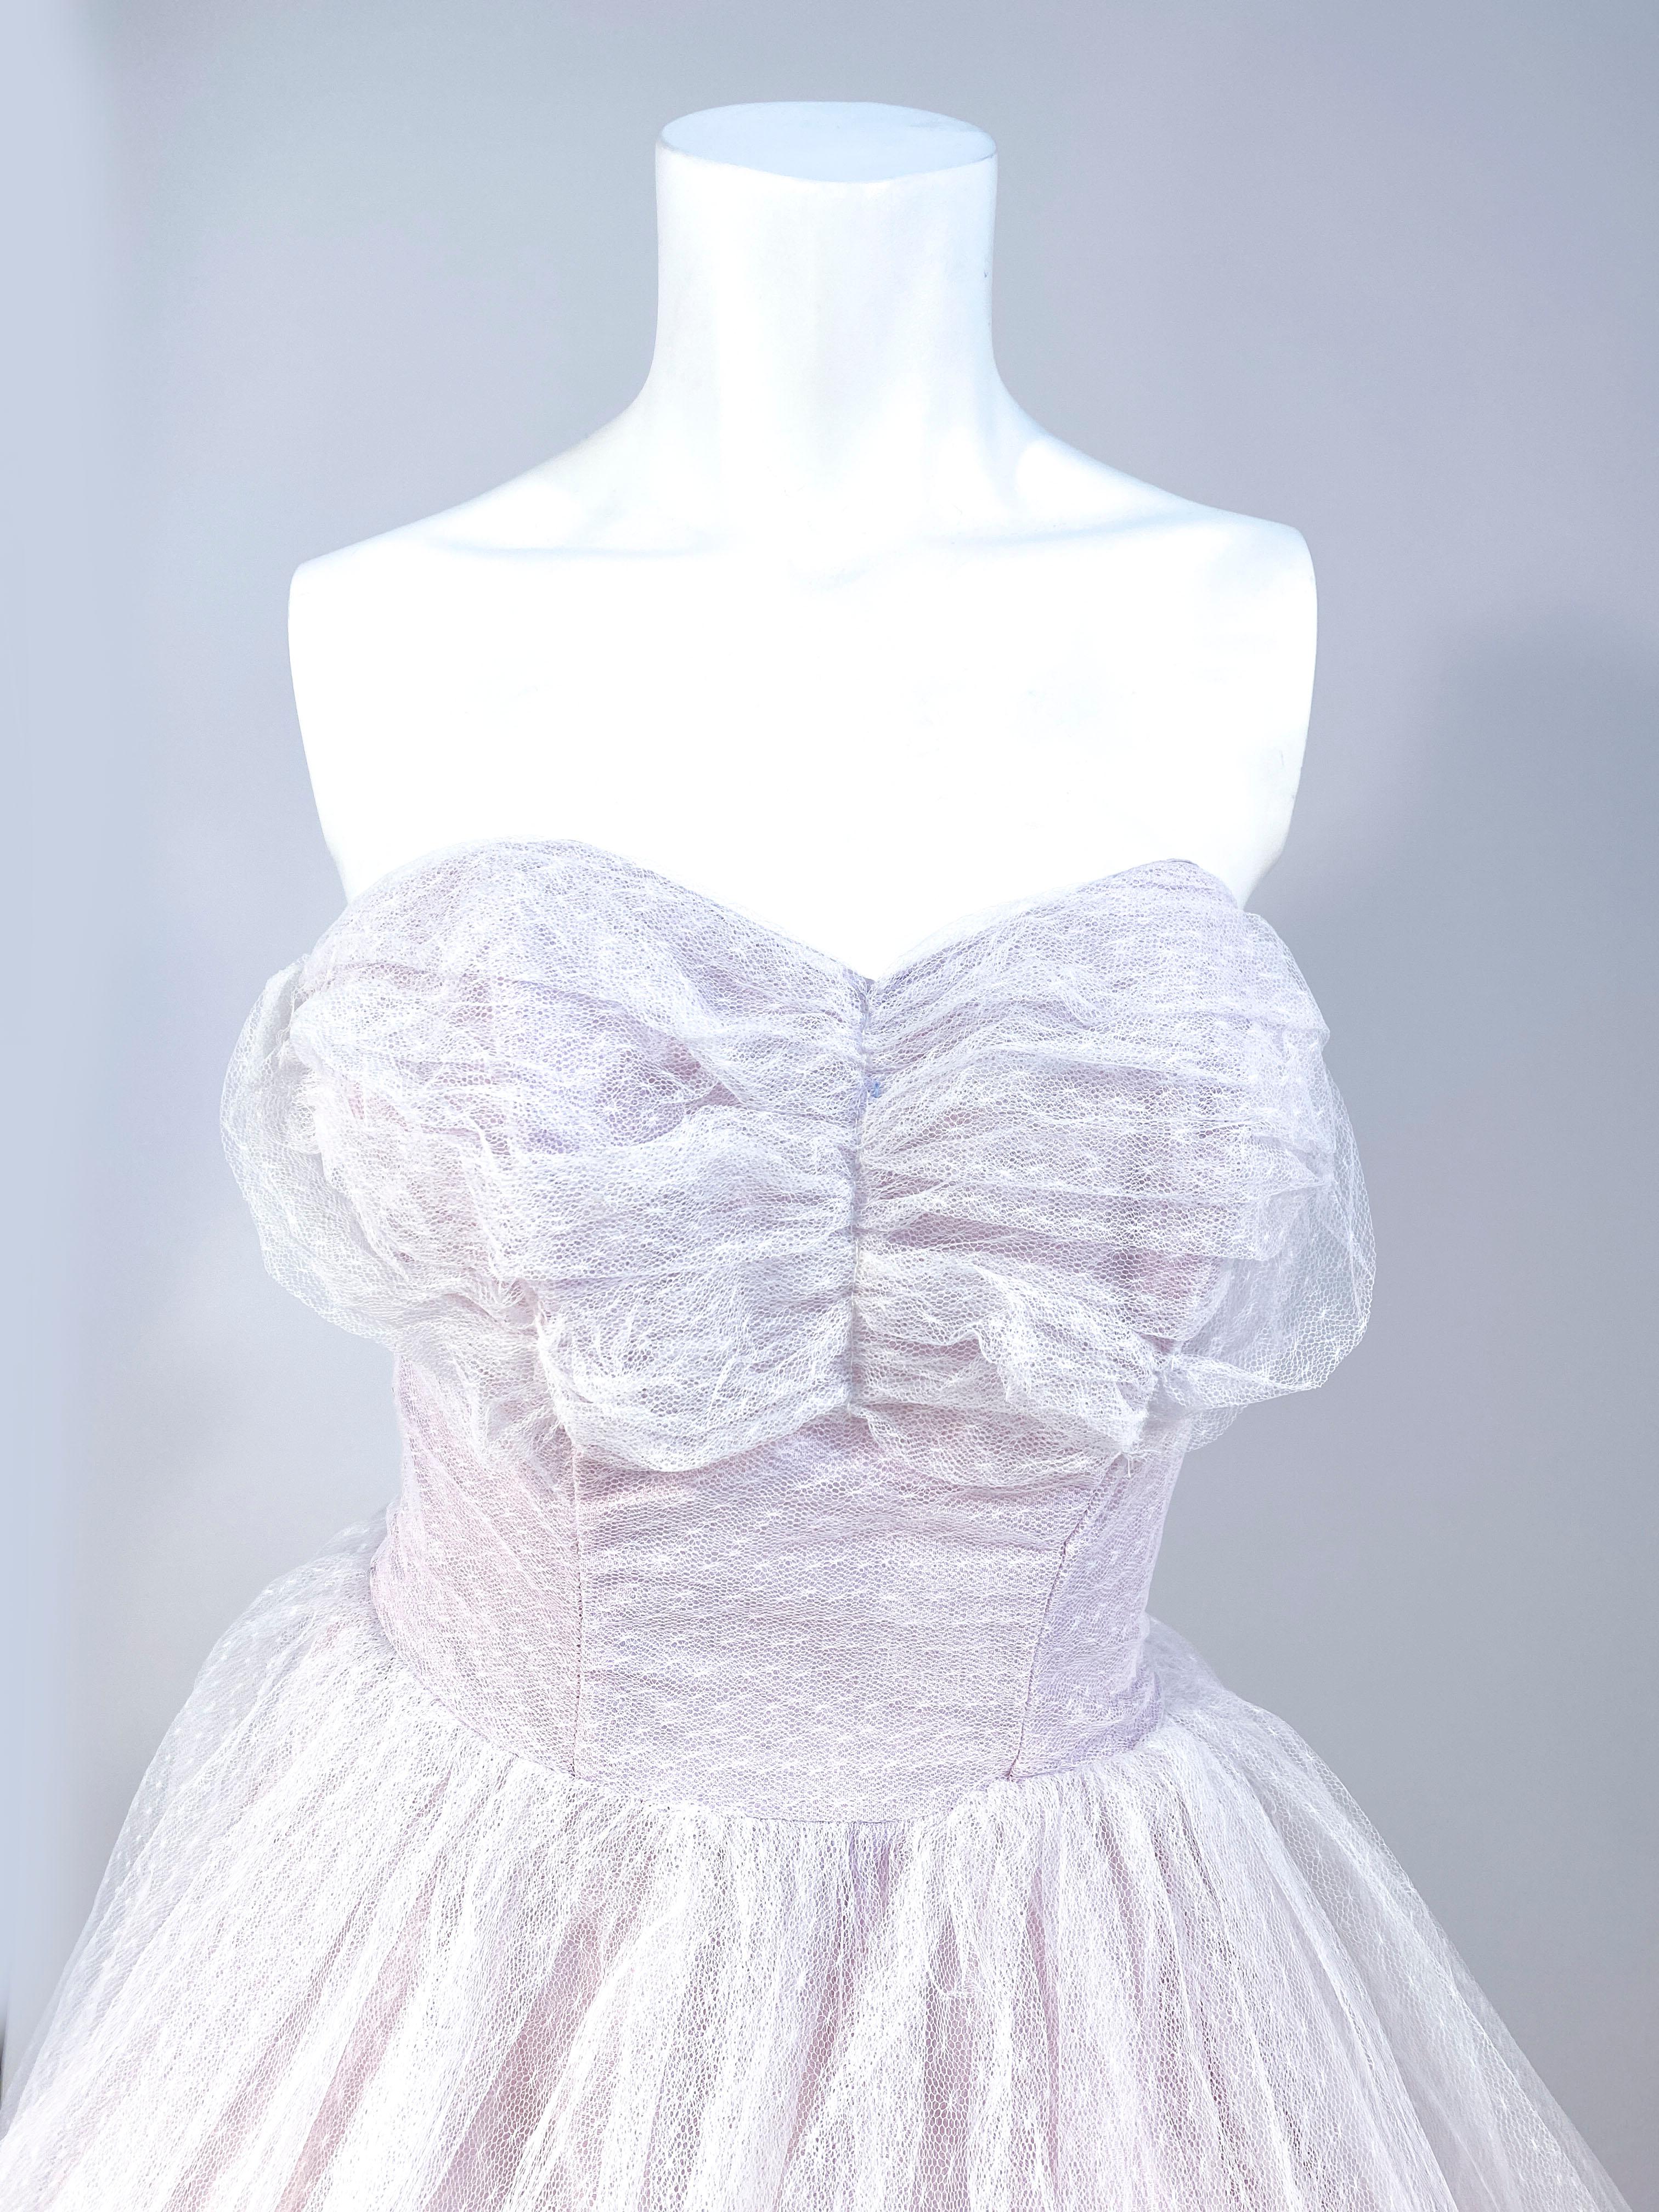 1950s white tulle dress with a lavender colored satin lining. The Bodice of the dress has ruching decorating the bust. The skirt is entirely made of a white tulle gathered at the waist extending to Austrian poof draping finished with six layers of